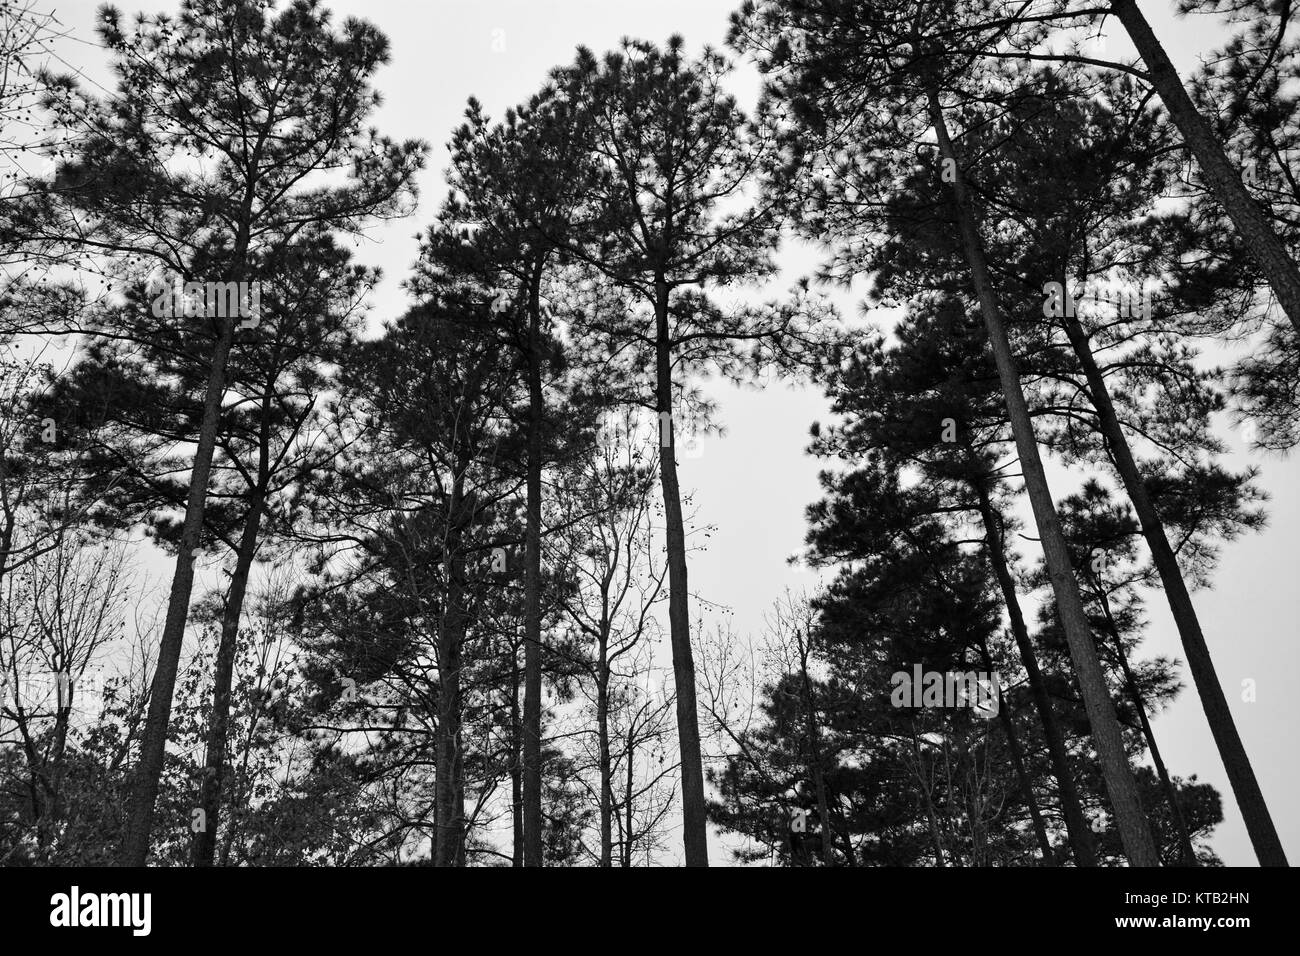 Loblolly or Yellow Pines silhouetted against the sky in the Albemarle Sound area of North Carolina Stock Photo